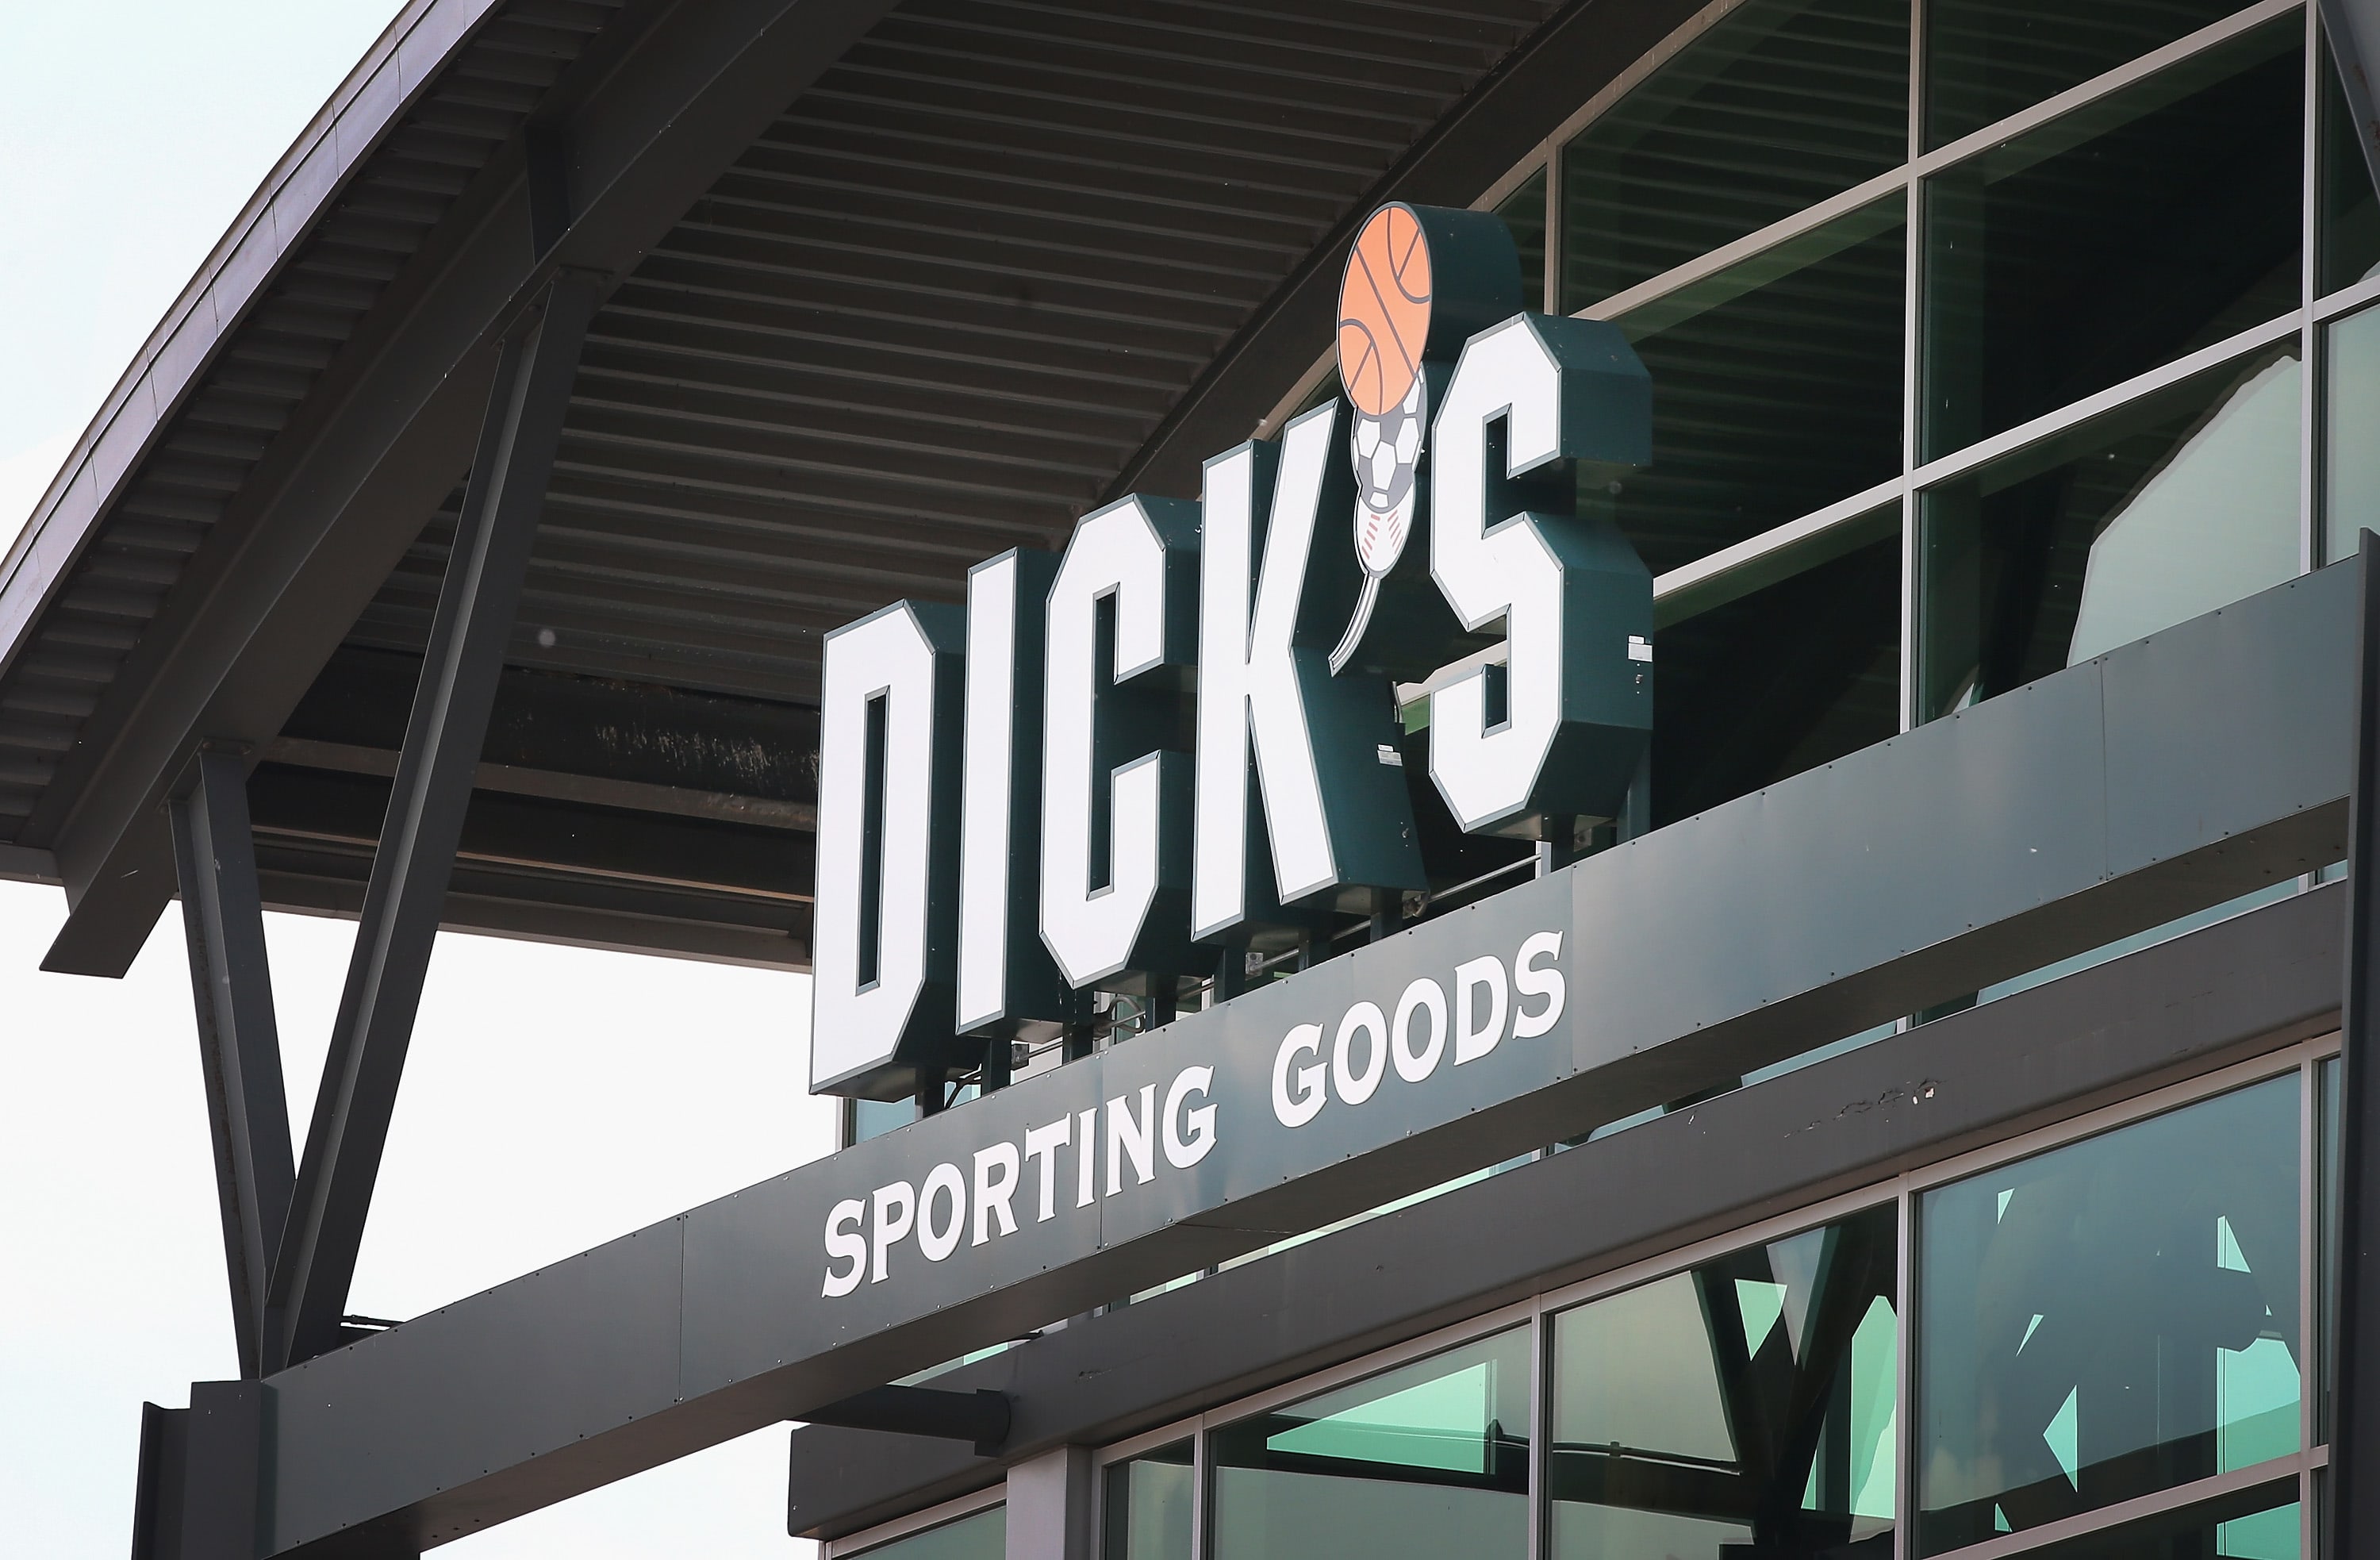 Dick’s Sporting Goods launches its own men’s sports line